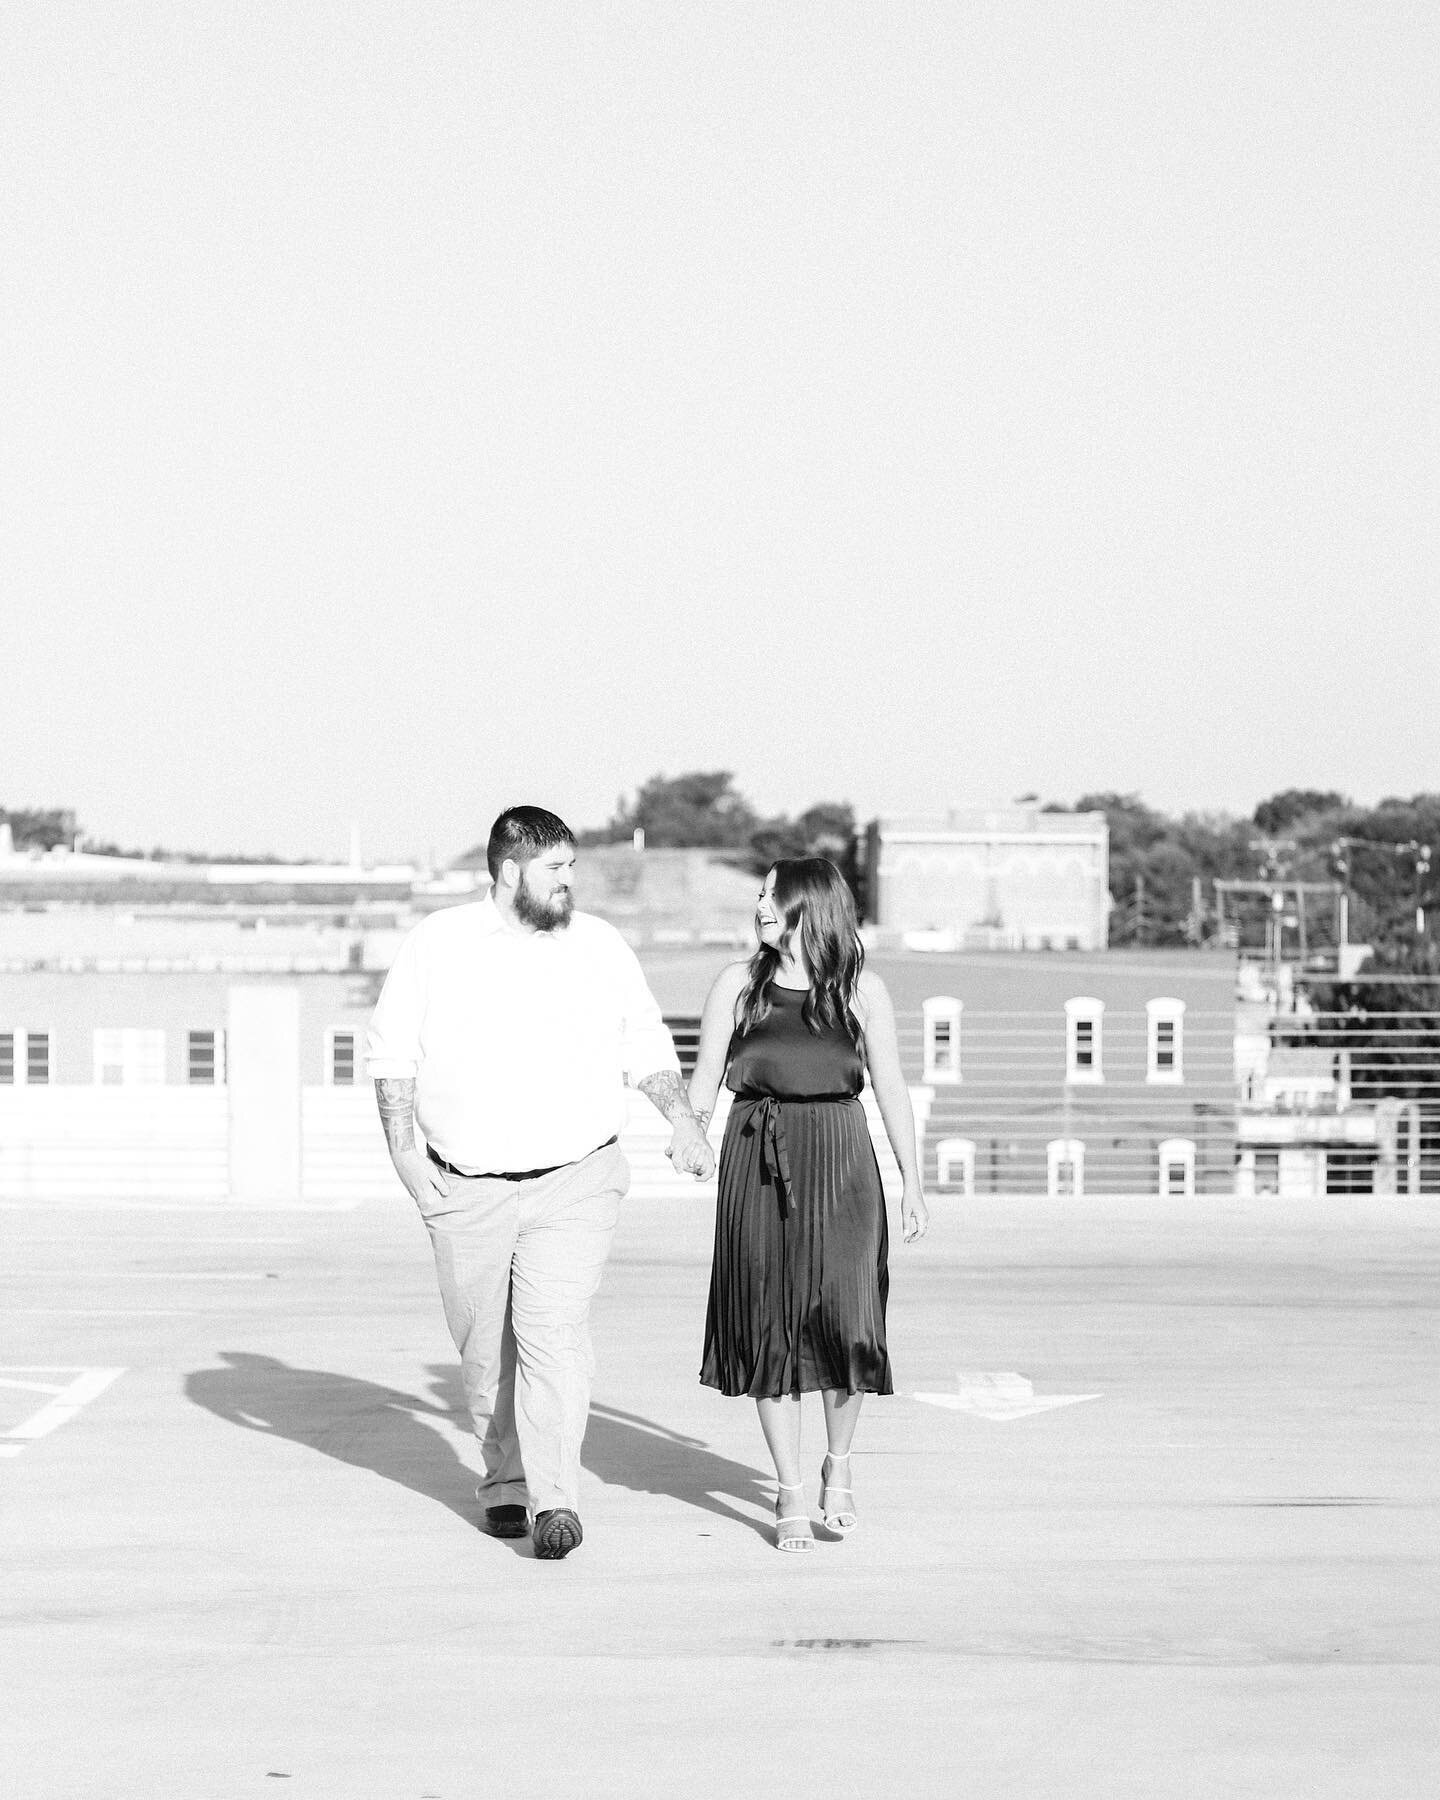 Sunrise #engagement session with Lea &amp; Jerrie! 
Love these black and white edits so much.